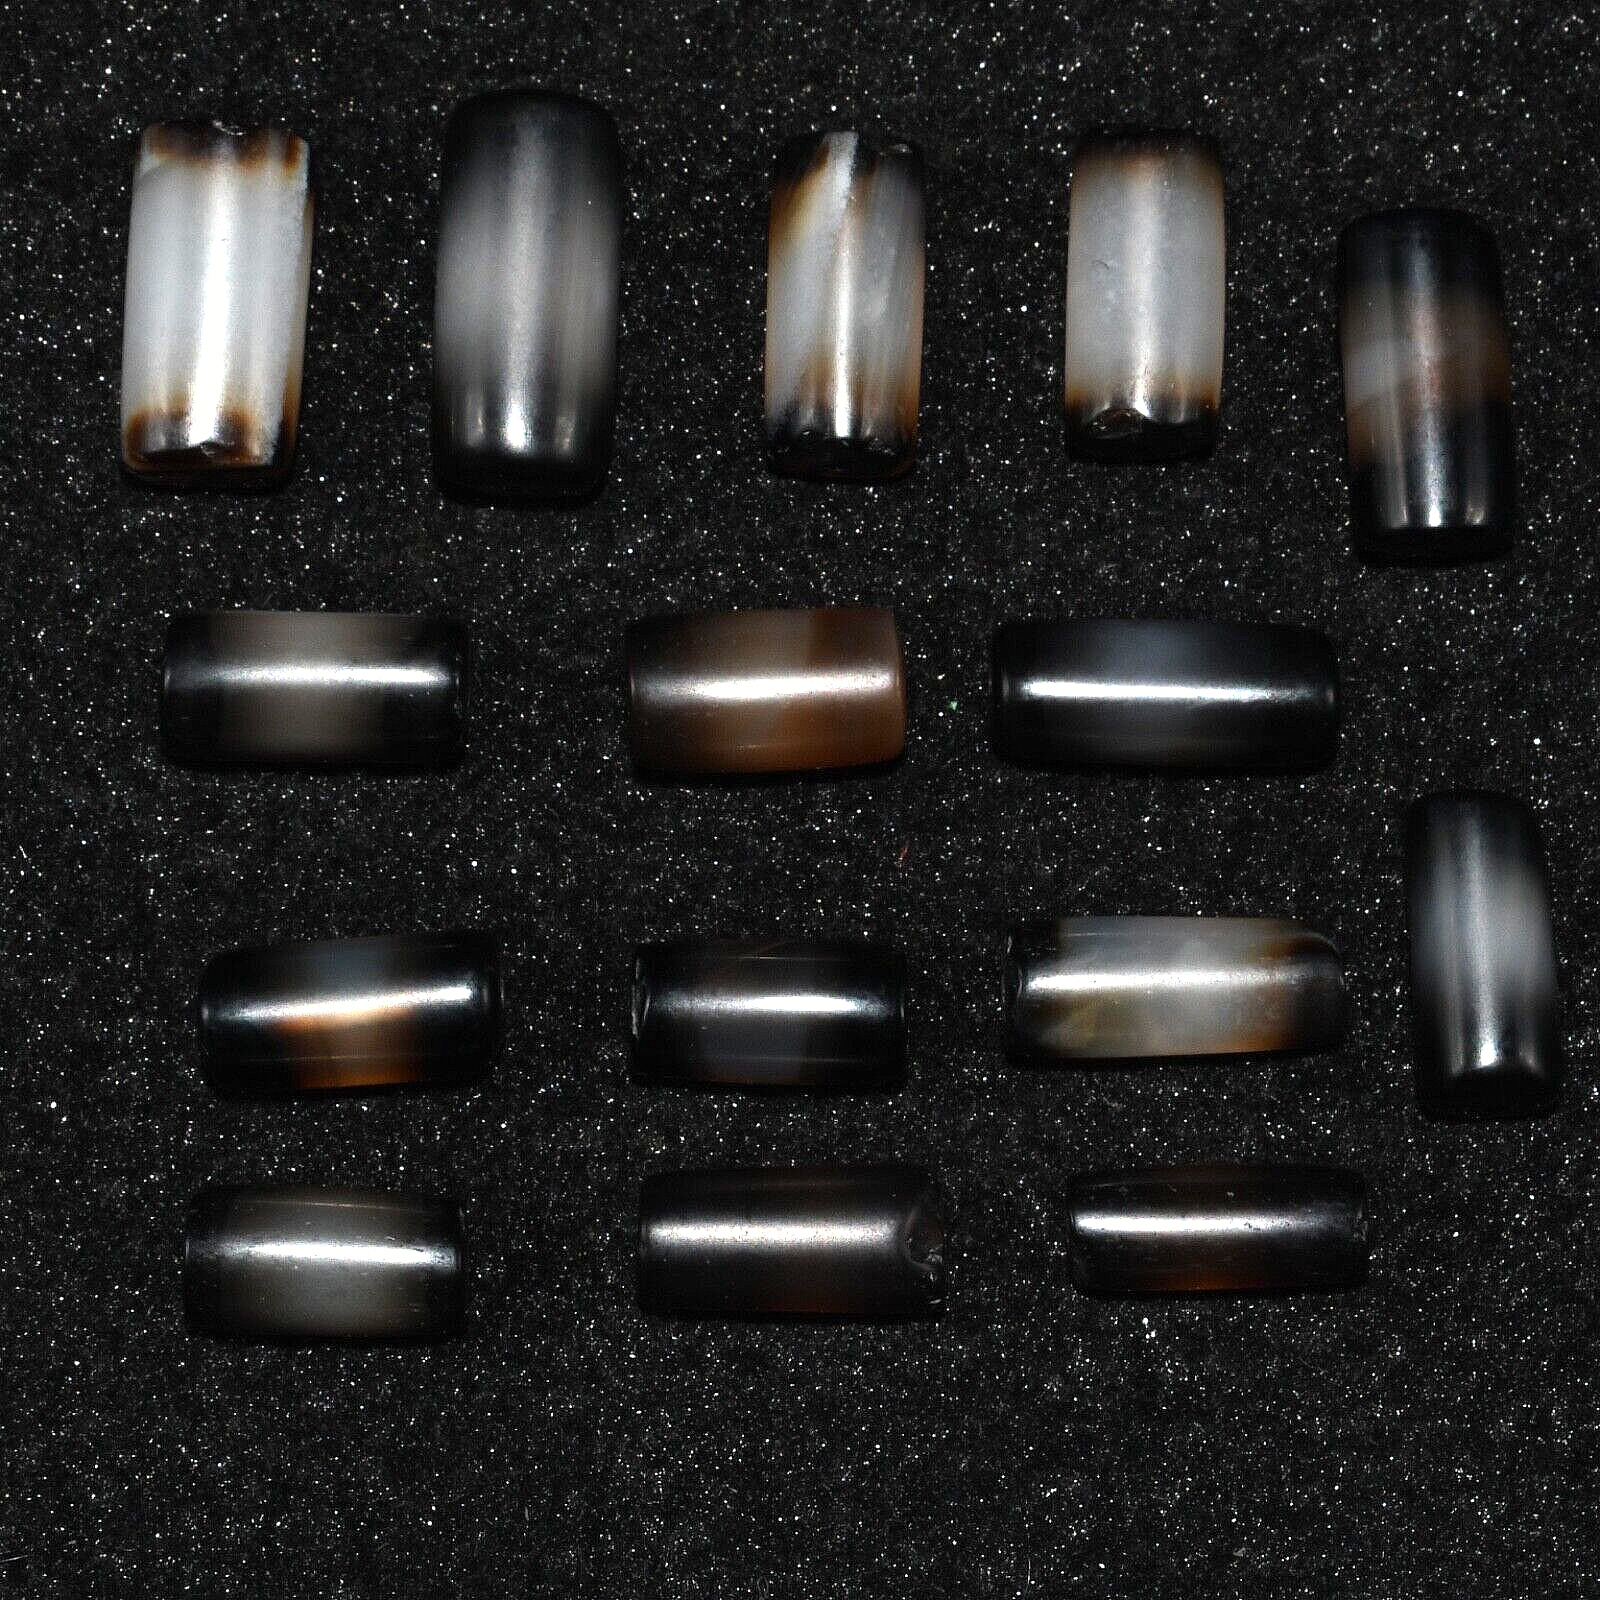 15 Large Ancient Agate Stone Chungzi Dzi Beads with Stripes in Good Condition